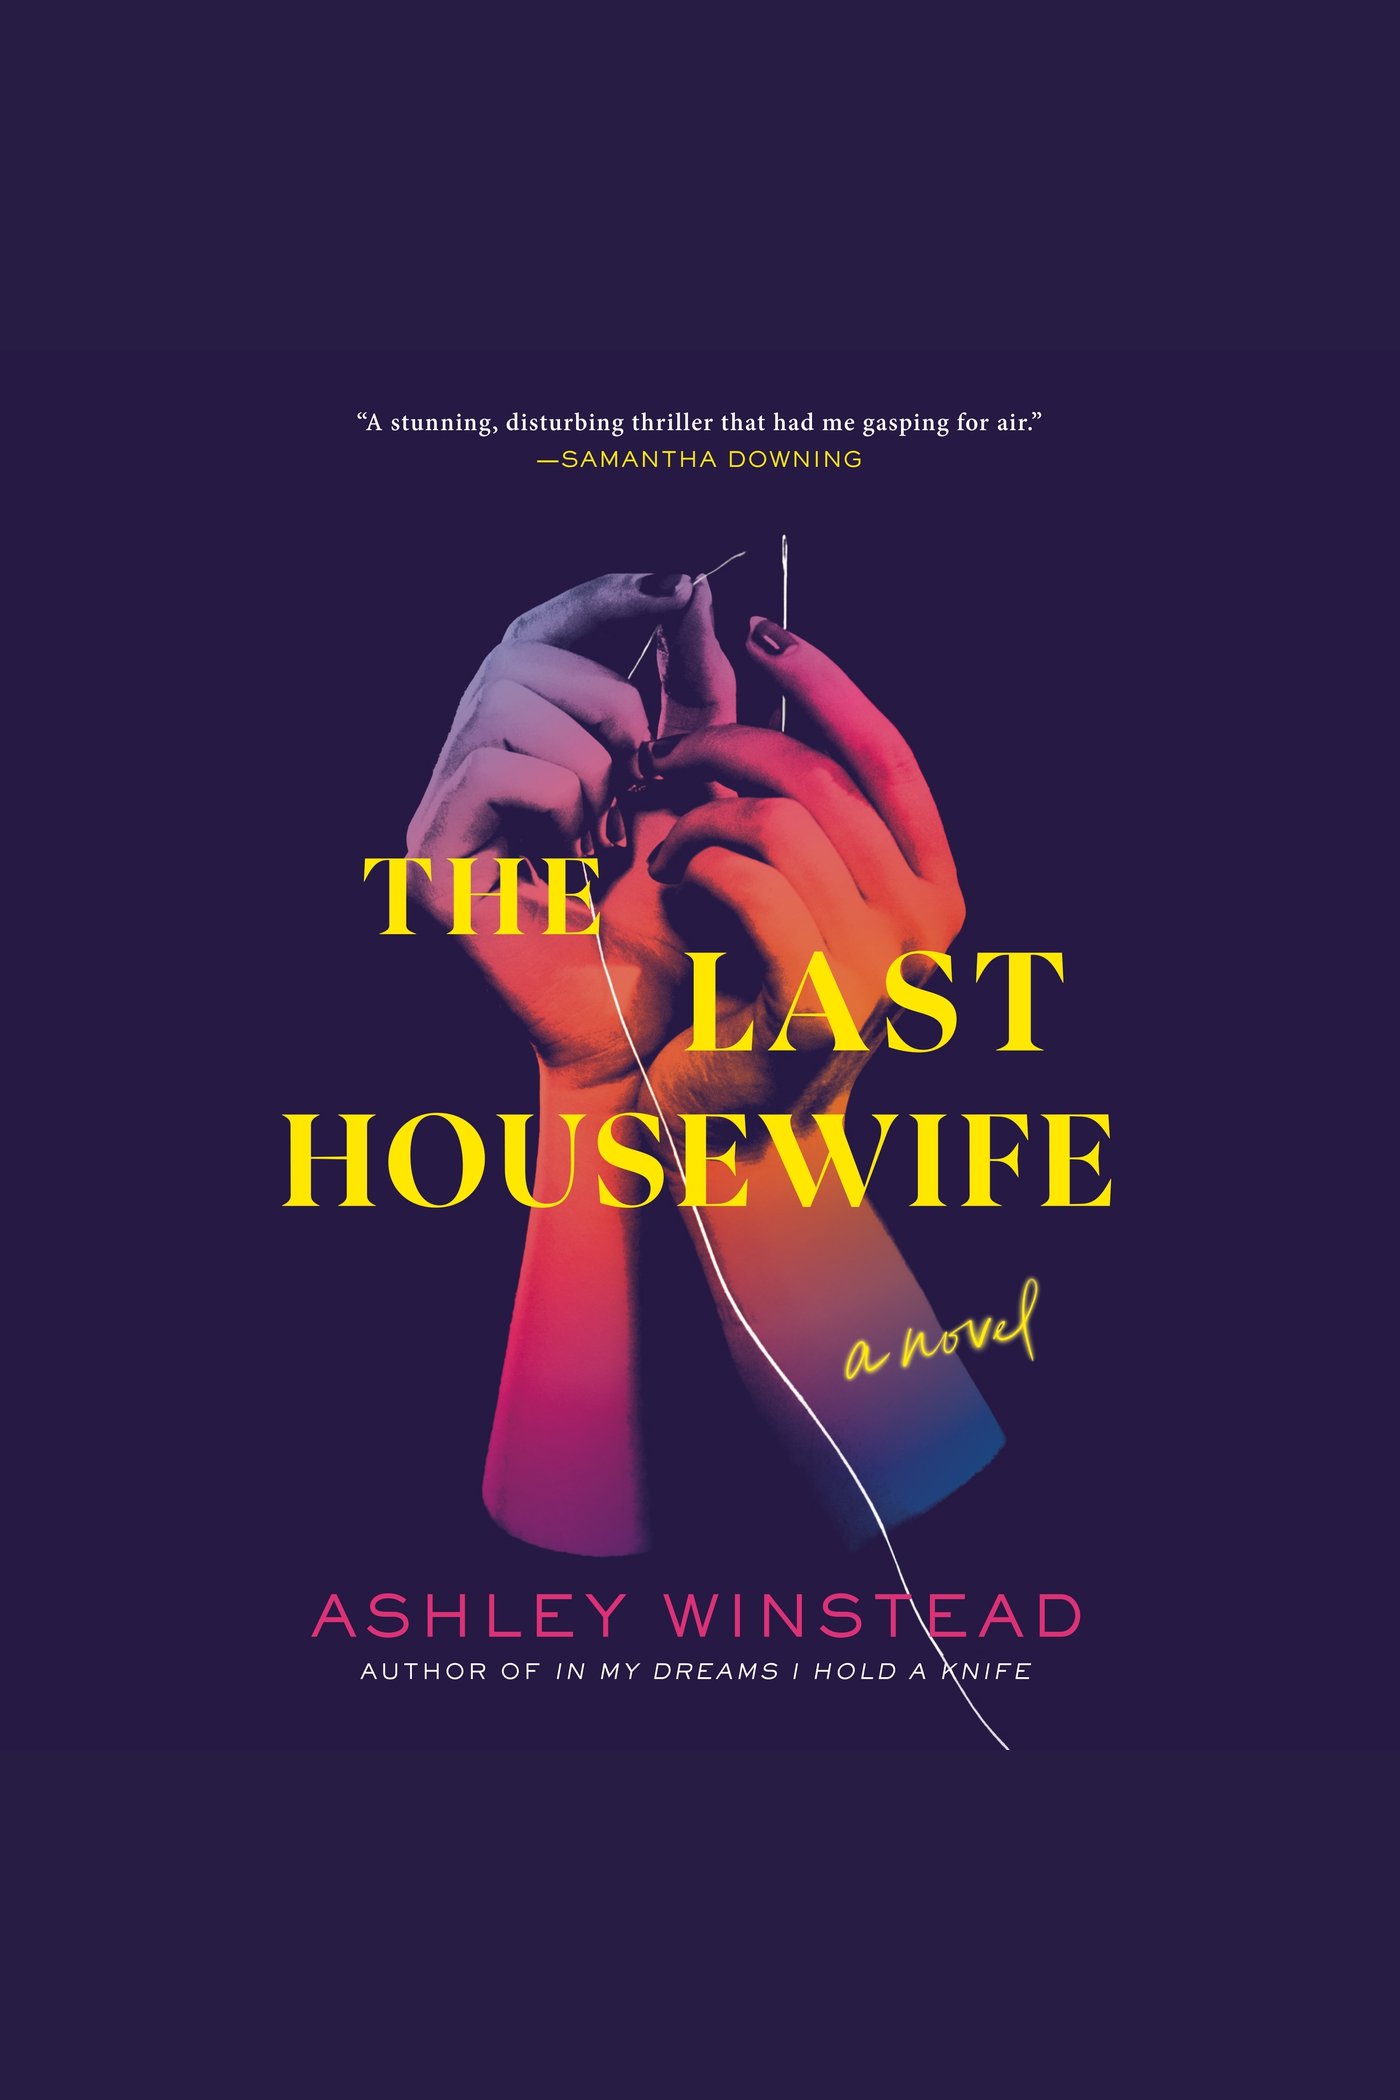 The Last Housewife cover image